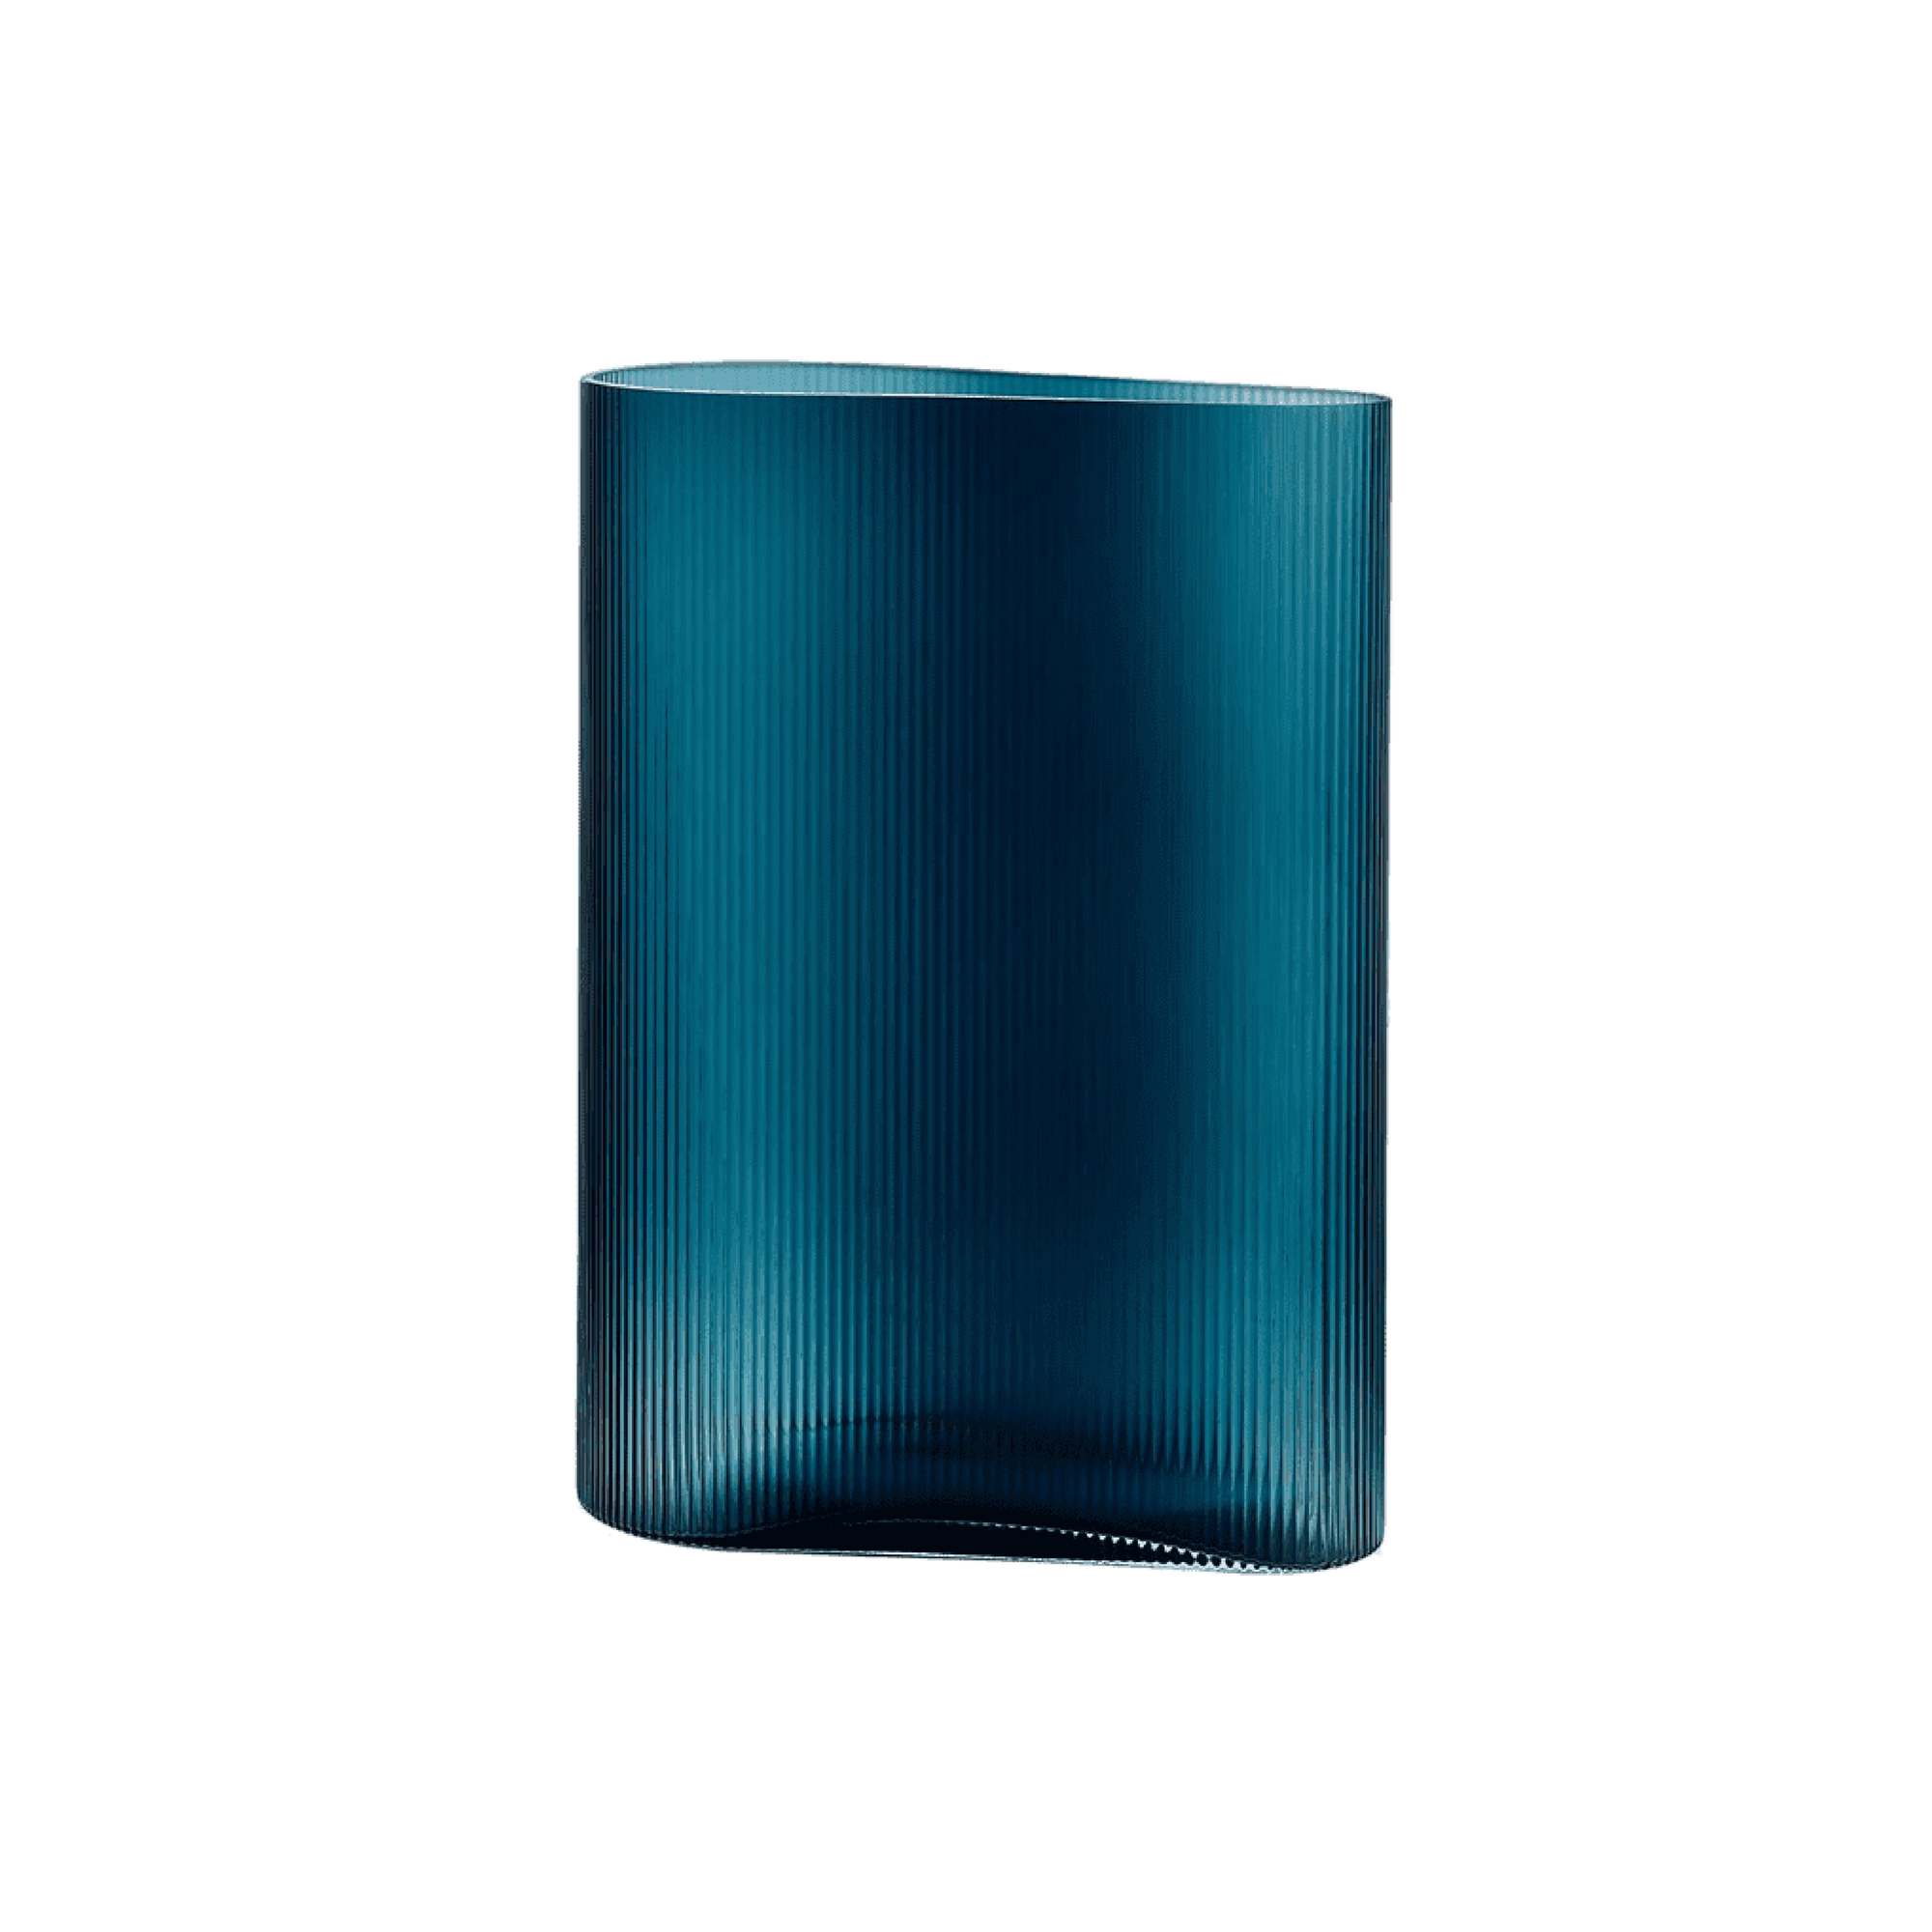 The Mist Vase in petroleum is made in an extraordinary clear yet corrugated glass.